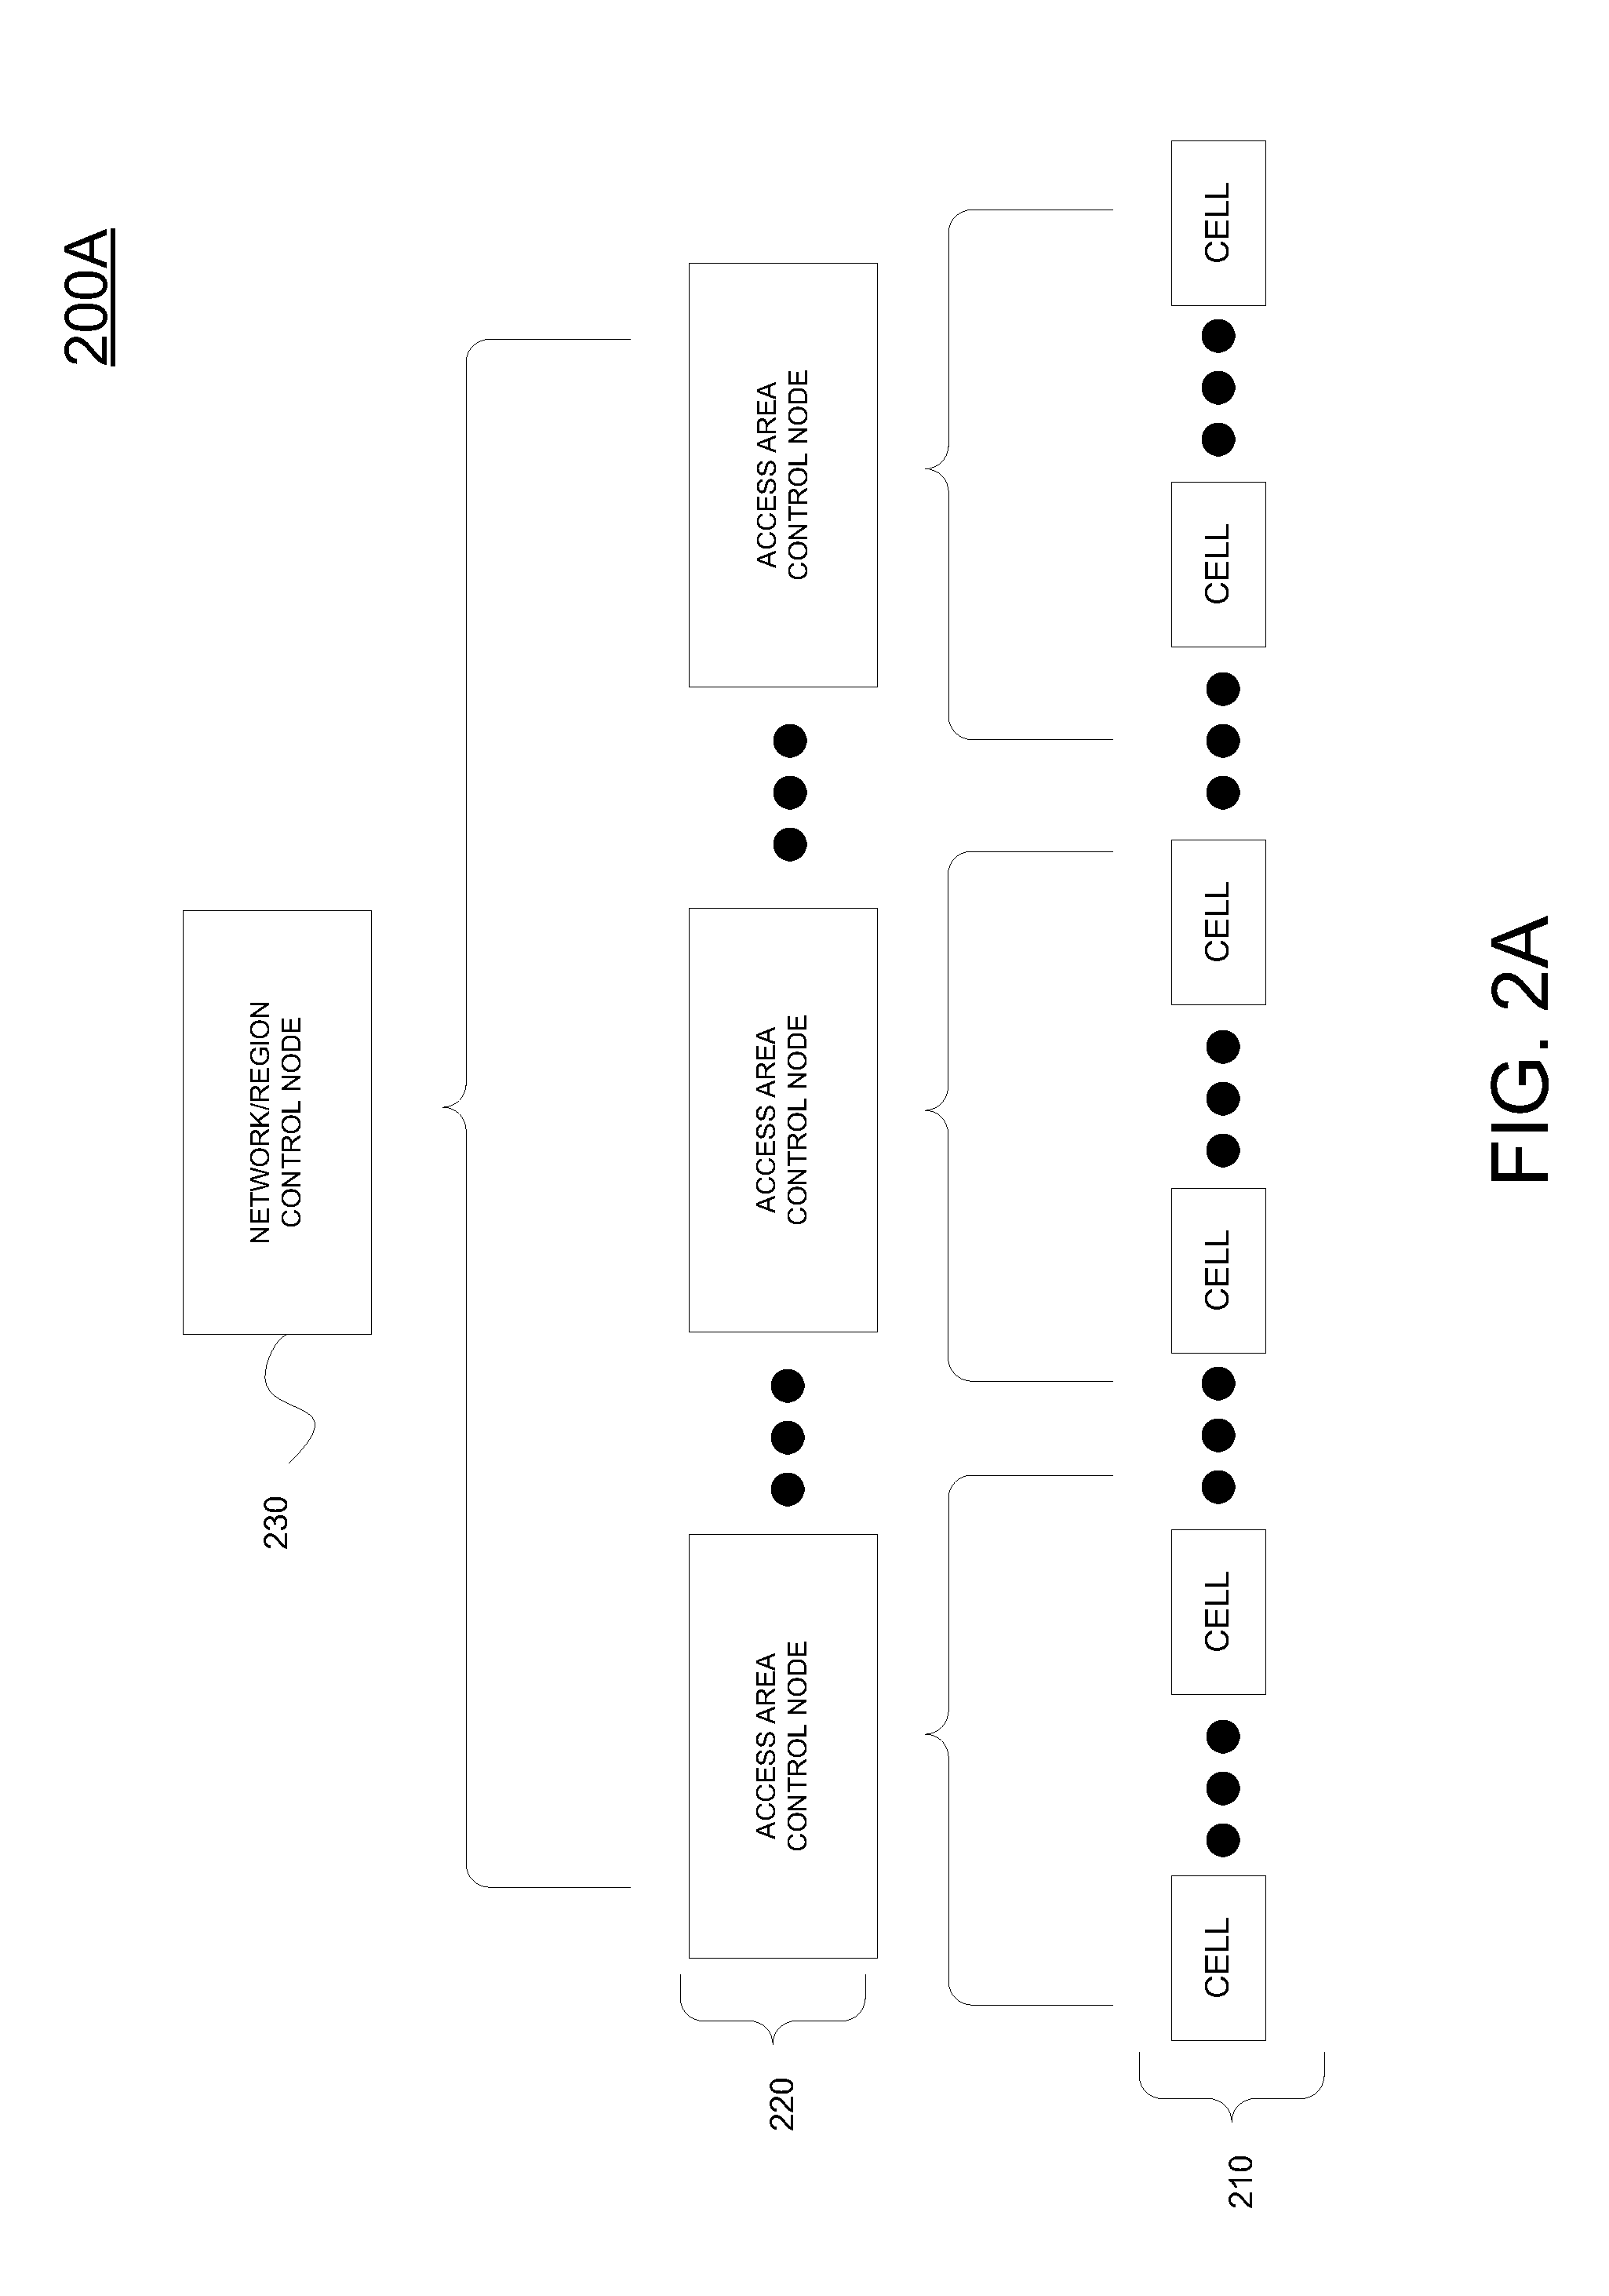 System and method for user equipment centric unified system access in virtual radio access network